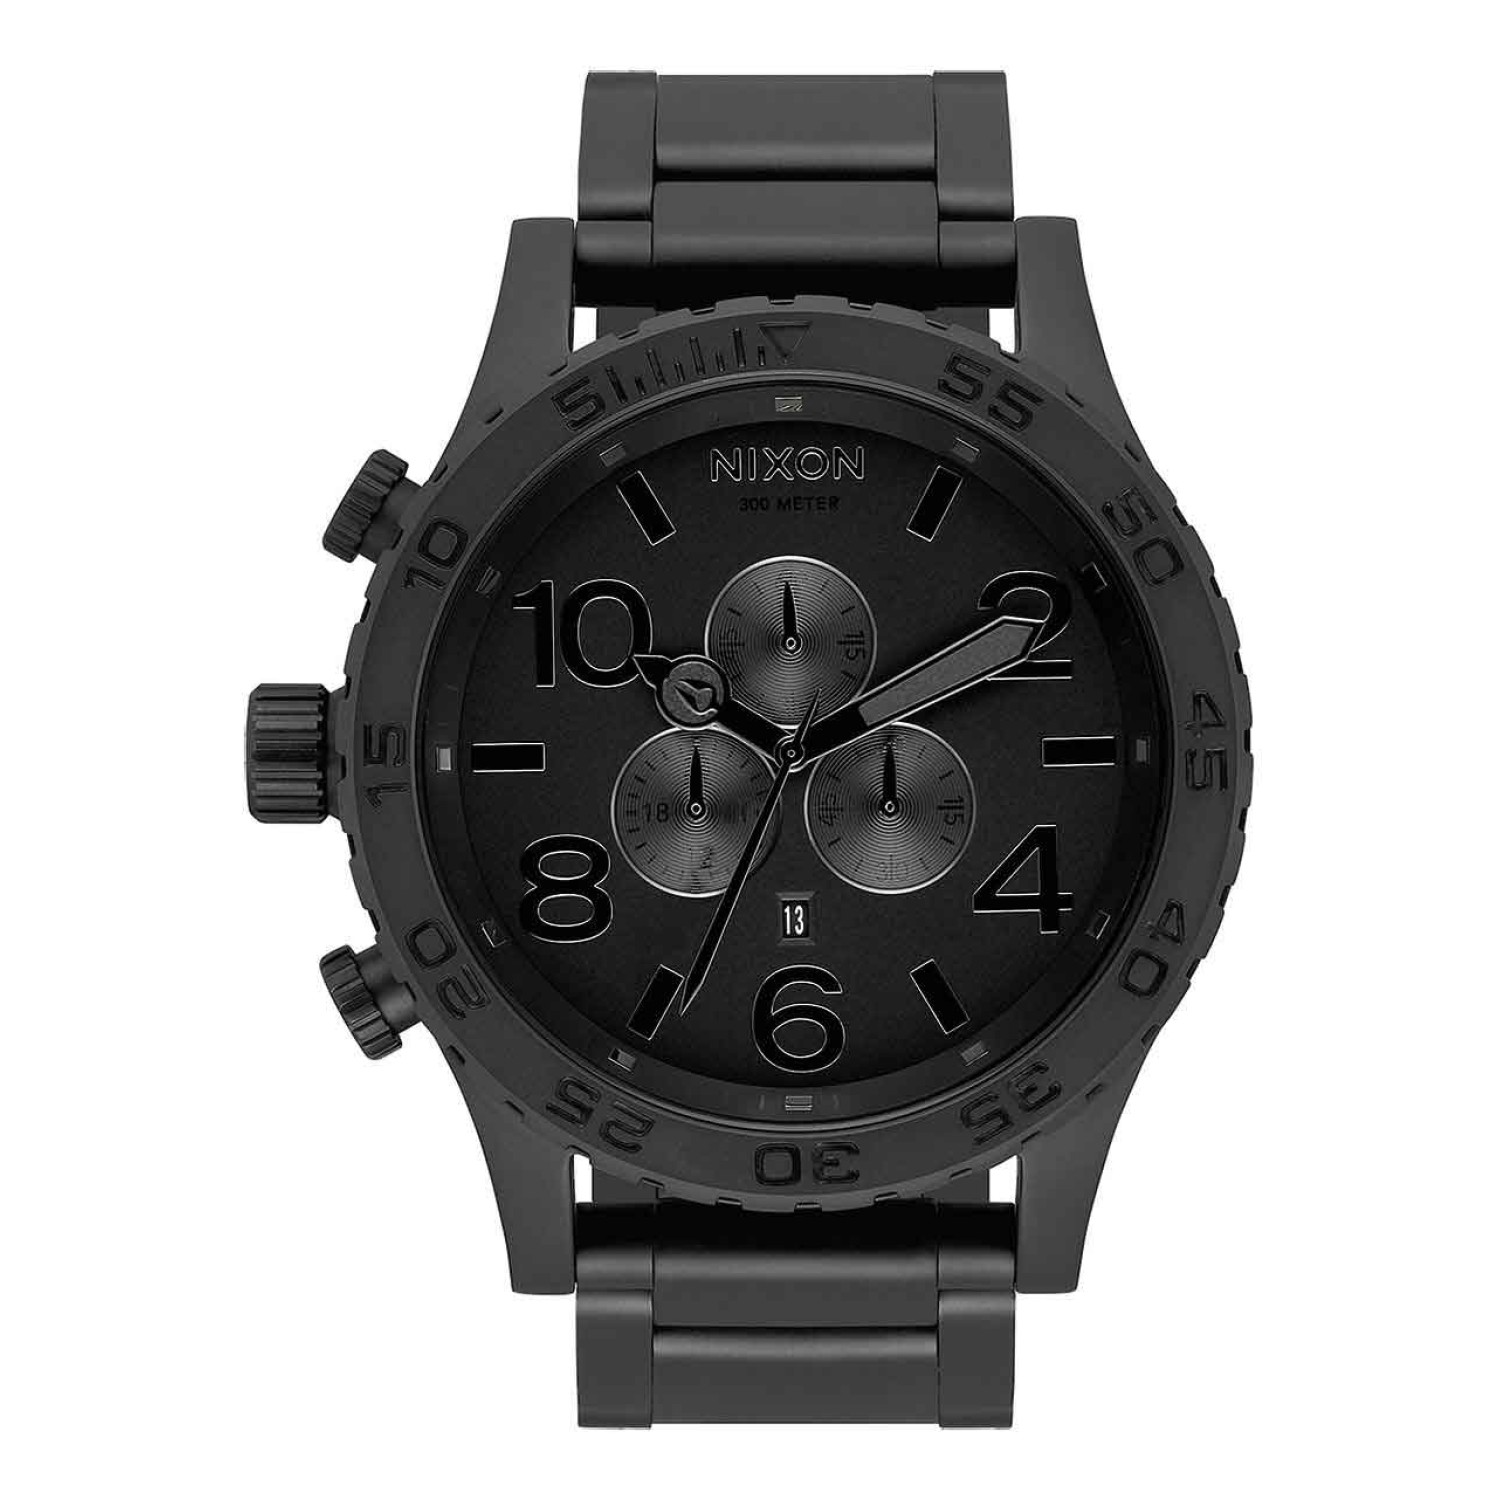 A083-3086-00 NIXON Mens 51-30 Chronograph Watch. Good looks, brains and brawn combined. The 51-30 Chrono rates second-to-none. Handsome, easy-to-read 51 mm design that launched the oversized trend, with 3 CD textured sub-dials - Matt Black2 Year  Guarant 